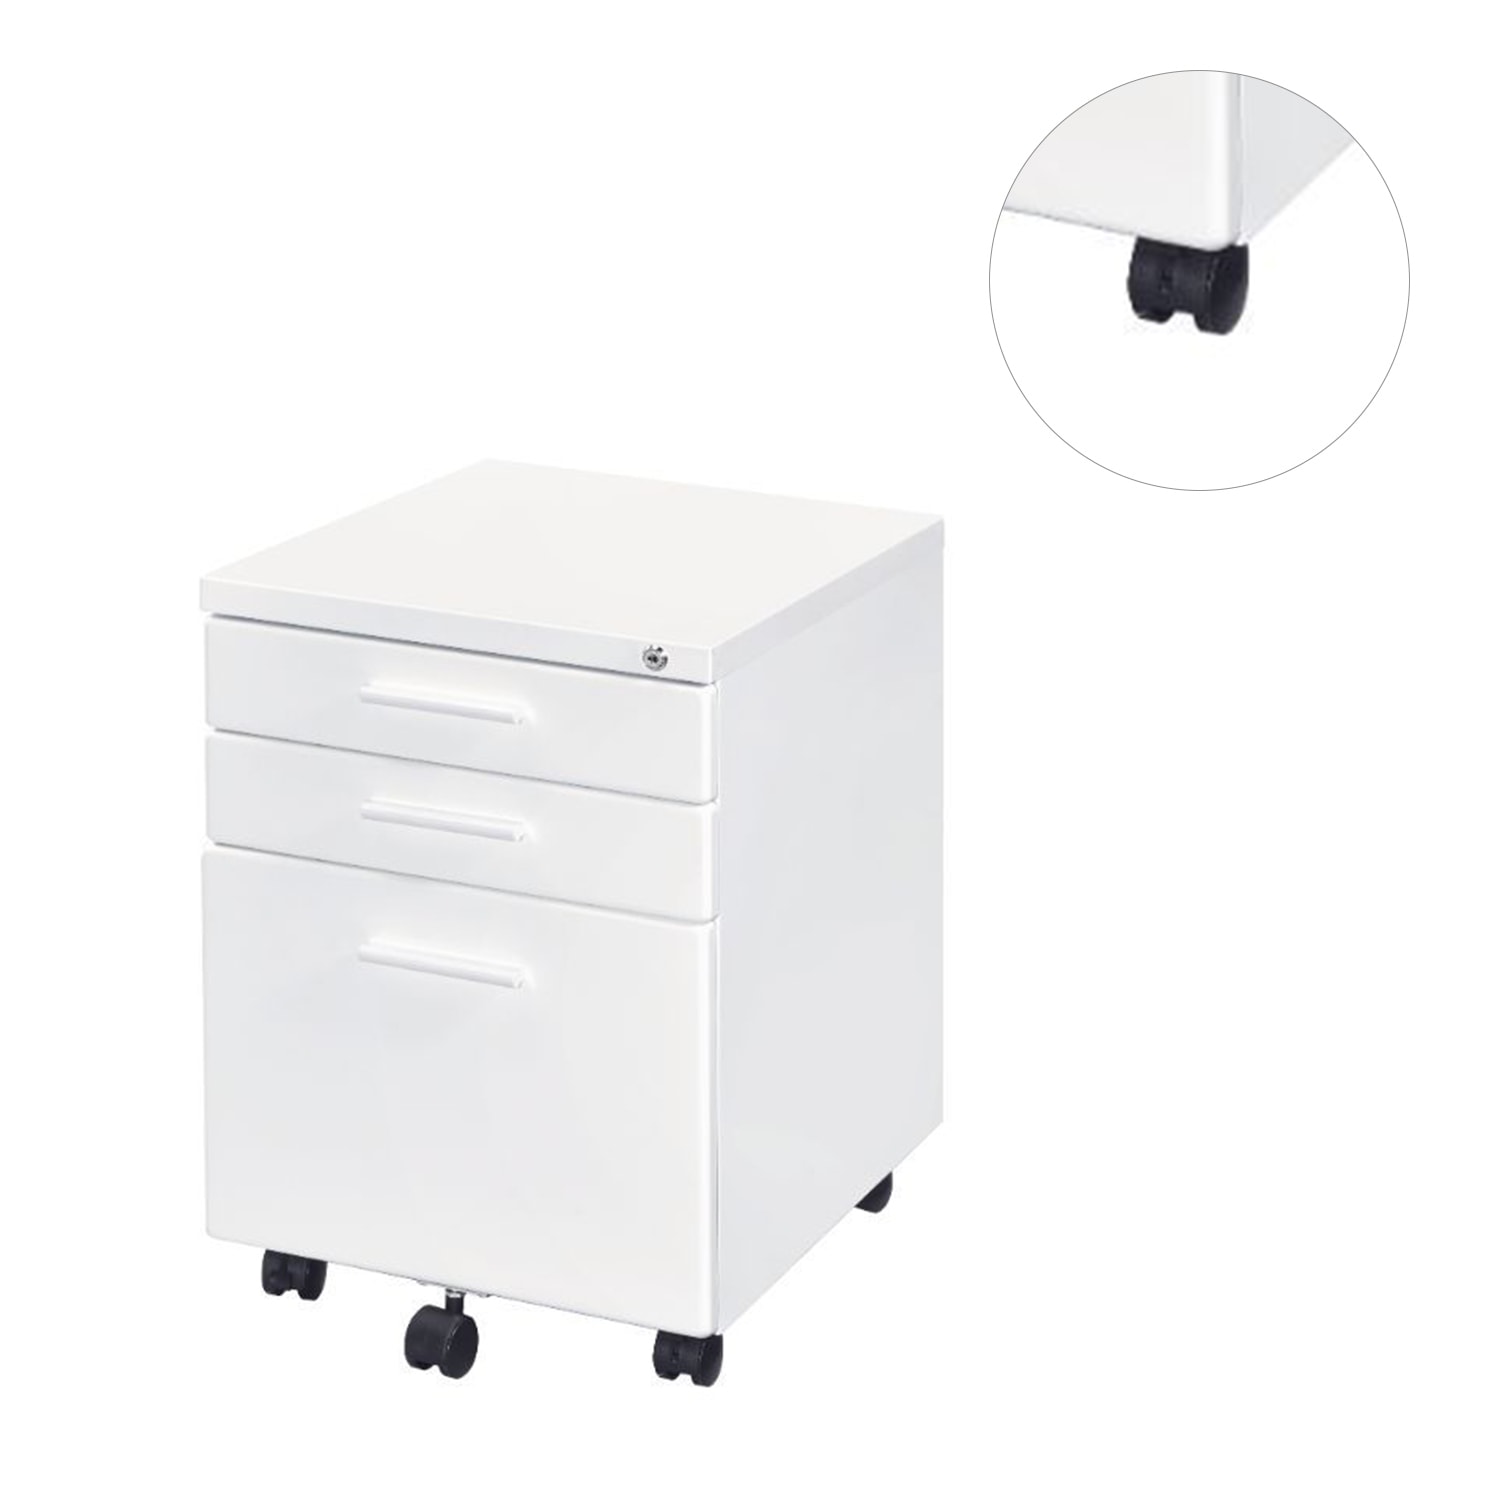 Wooden File Cabinet with 3 Drawers - Black